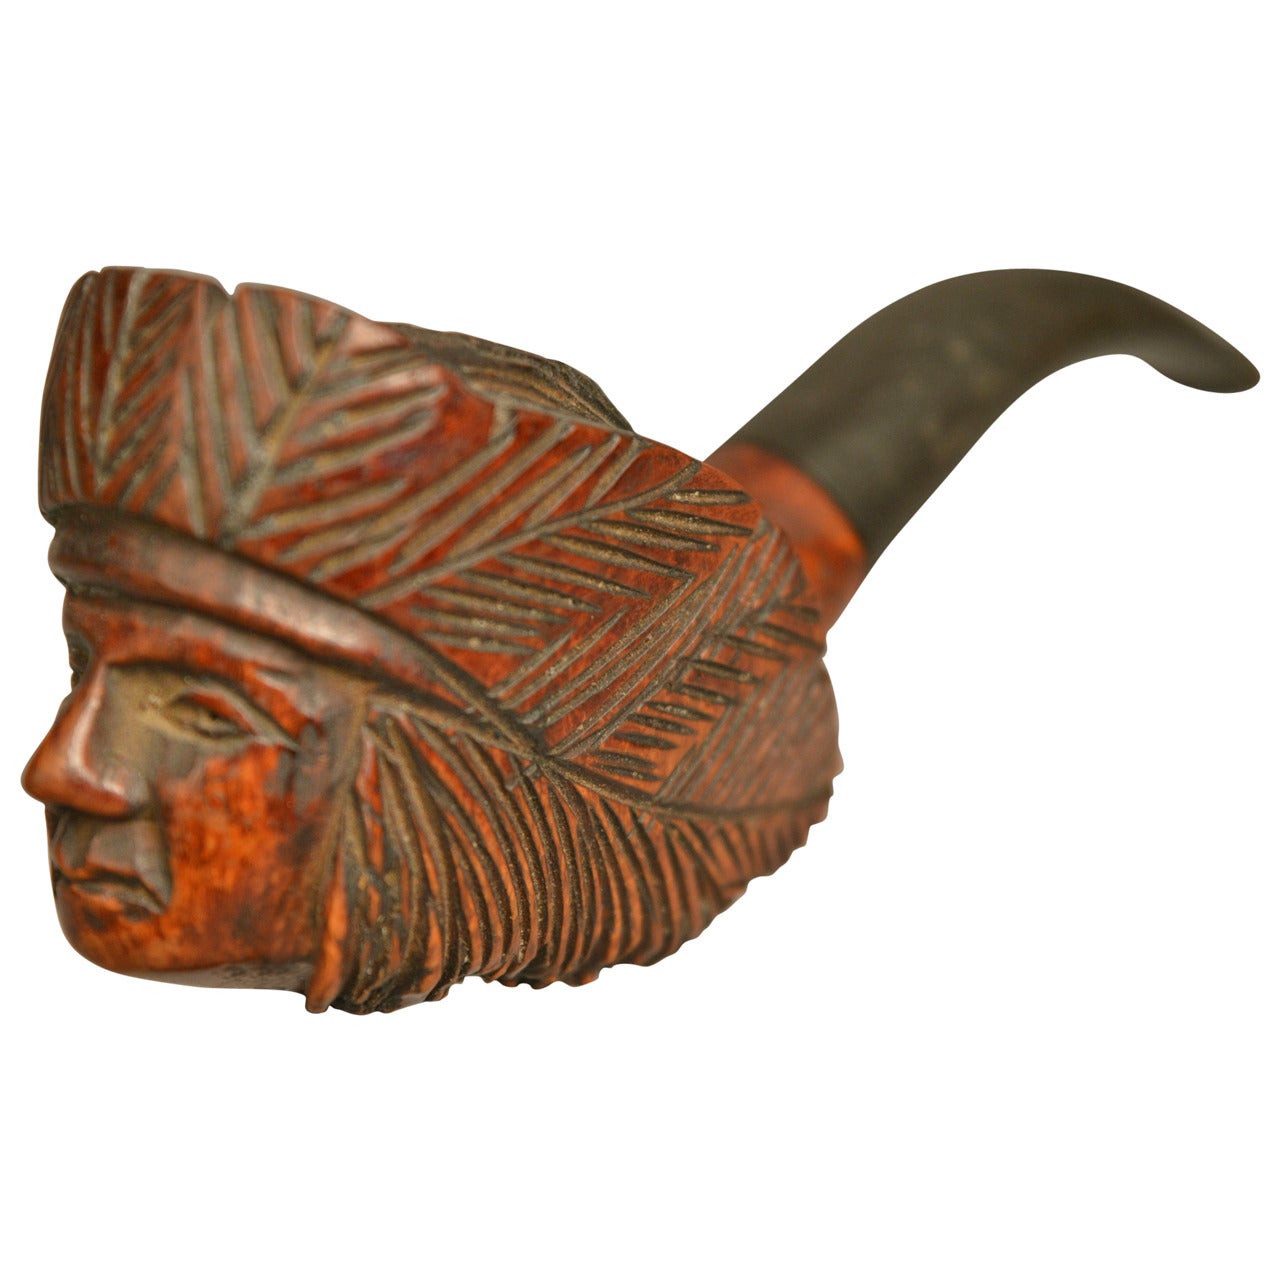 Vintage French Briarwood Pipe Carved With A Native American Indian Chief